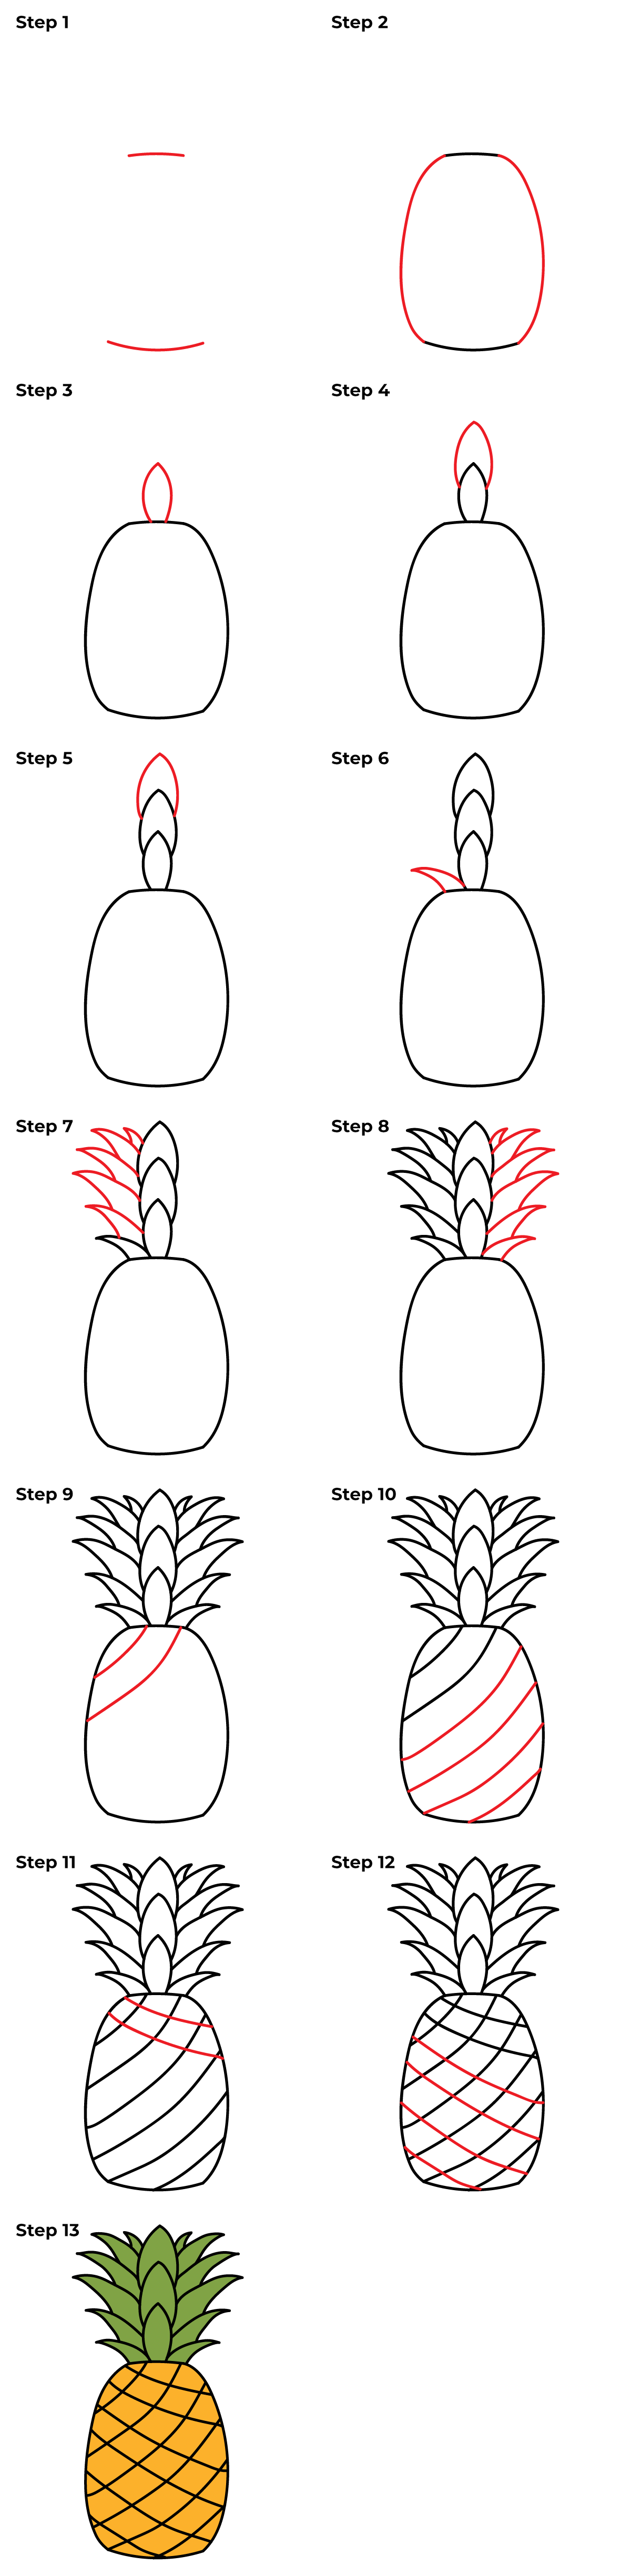 How to draw a pineapple. Step-by-step drawing tutorial.